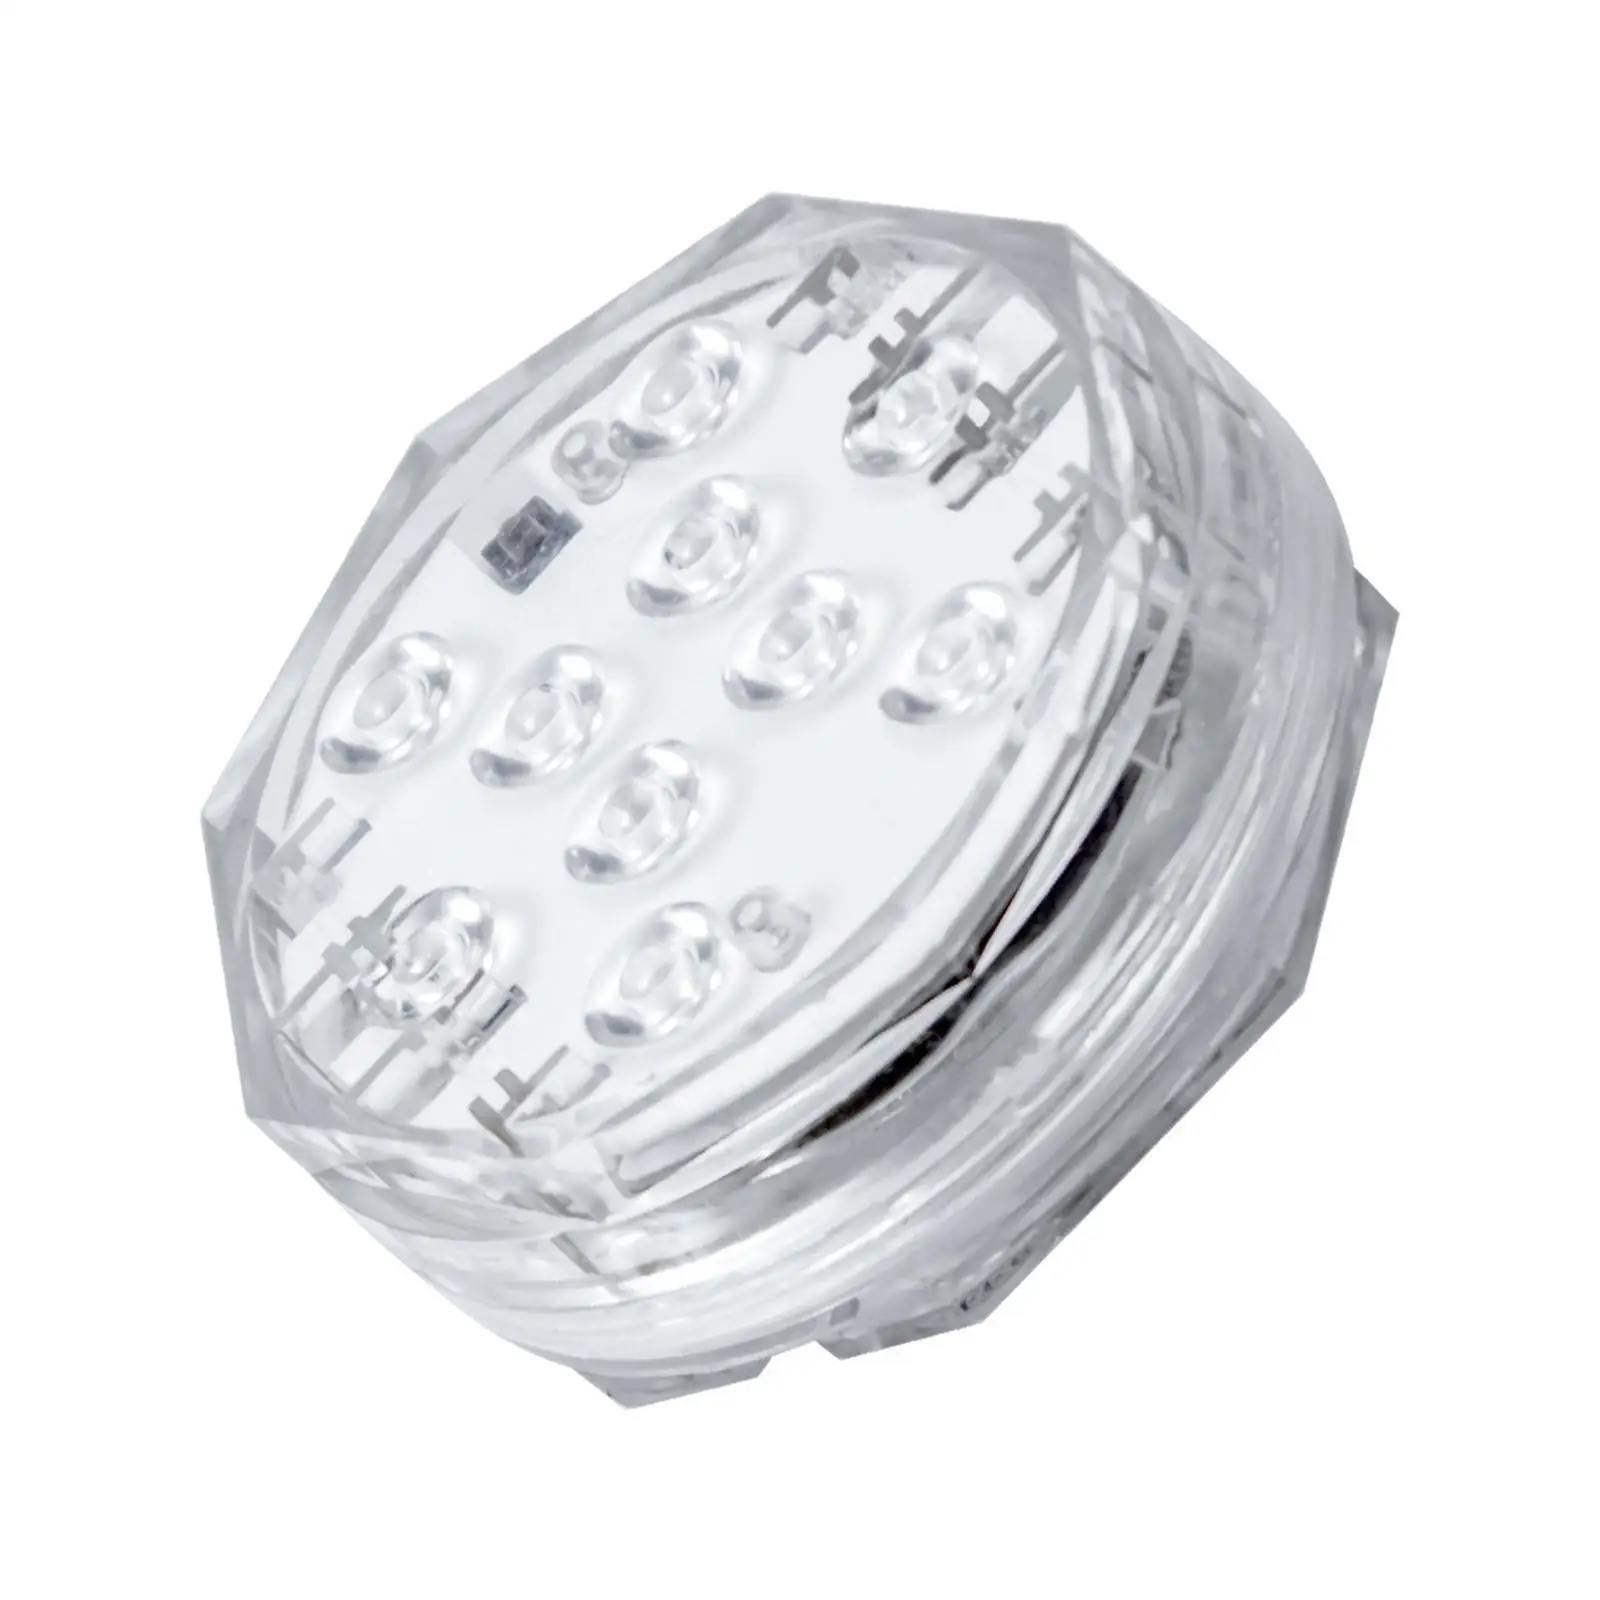 IP68 Waterproof Submersible LED Light Battery Operated Underwater Lamp for Decoration